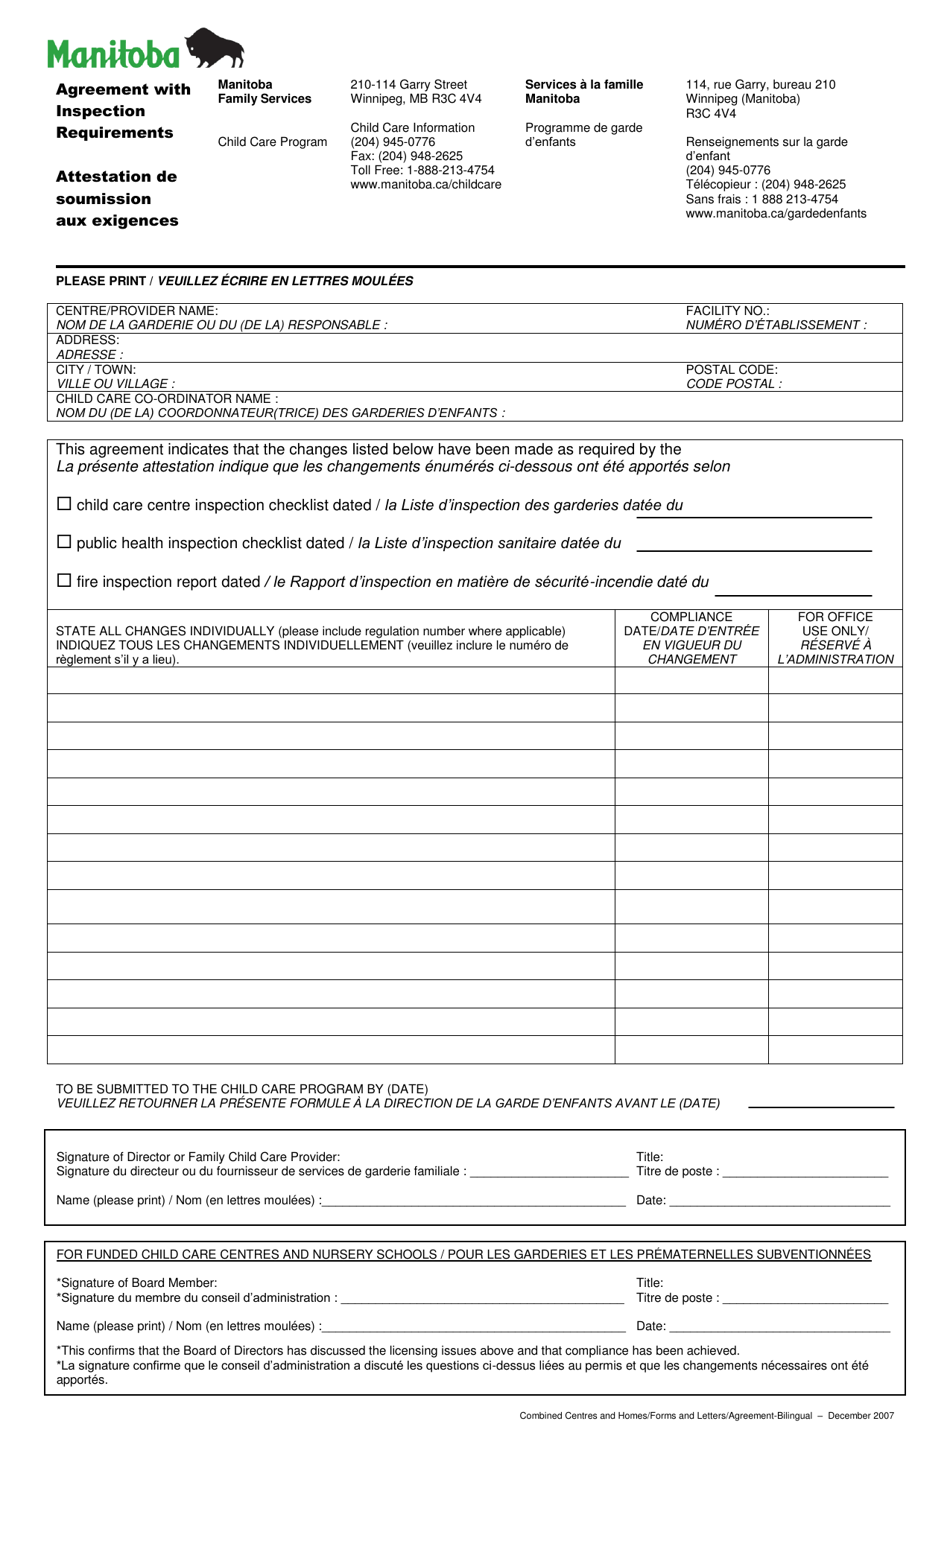 Agreement With Inspection Requirements - Manitoba, Canada (English / French), Page 1